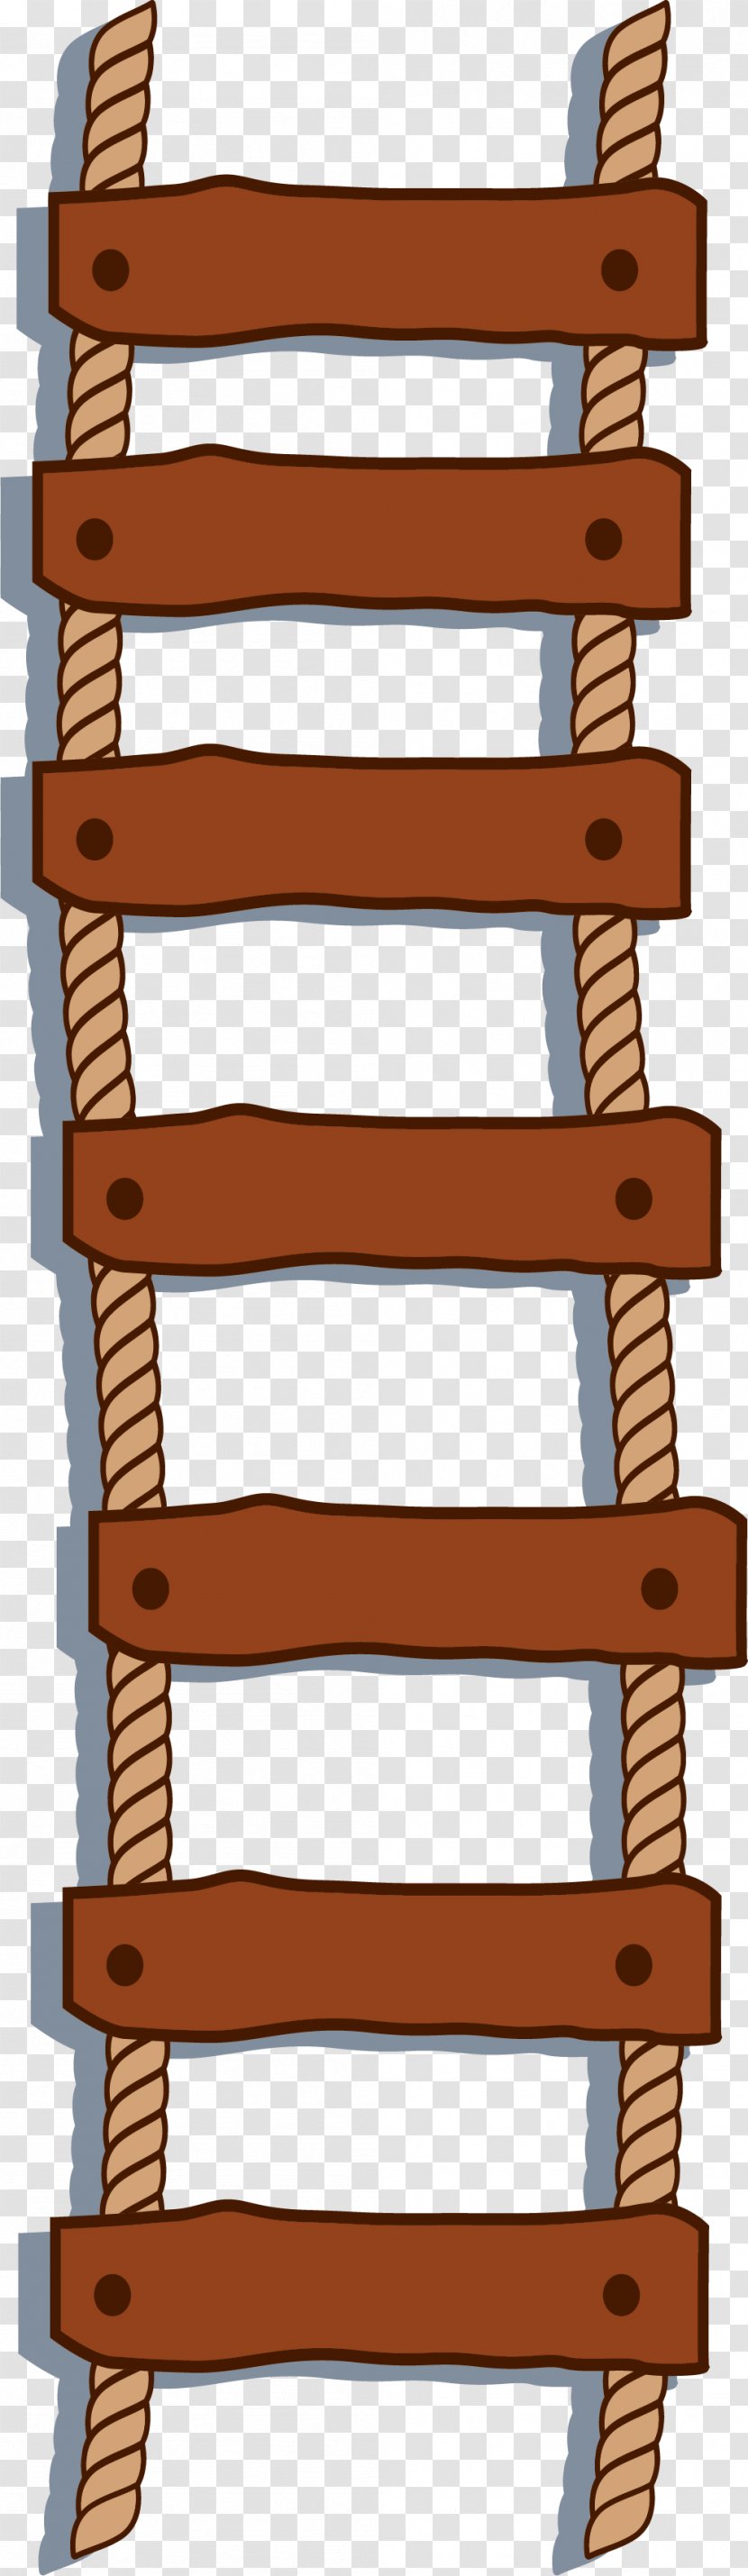 Ladder Stairs Repstege - Fixed Transparent PNG